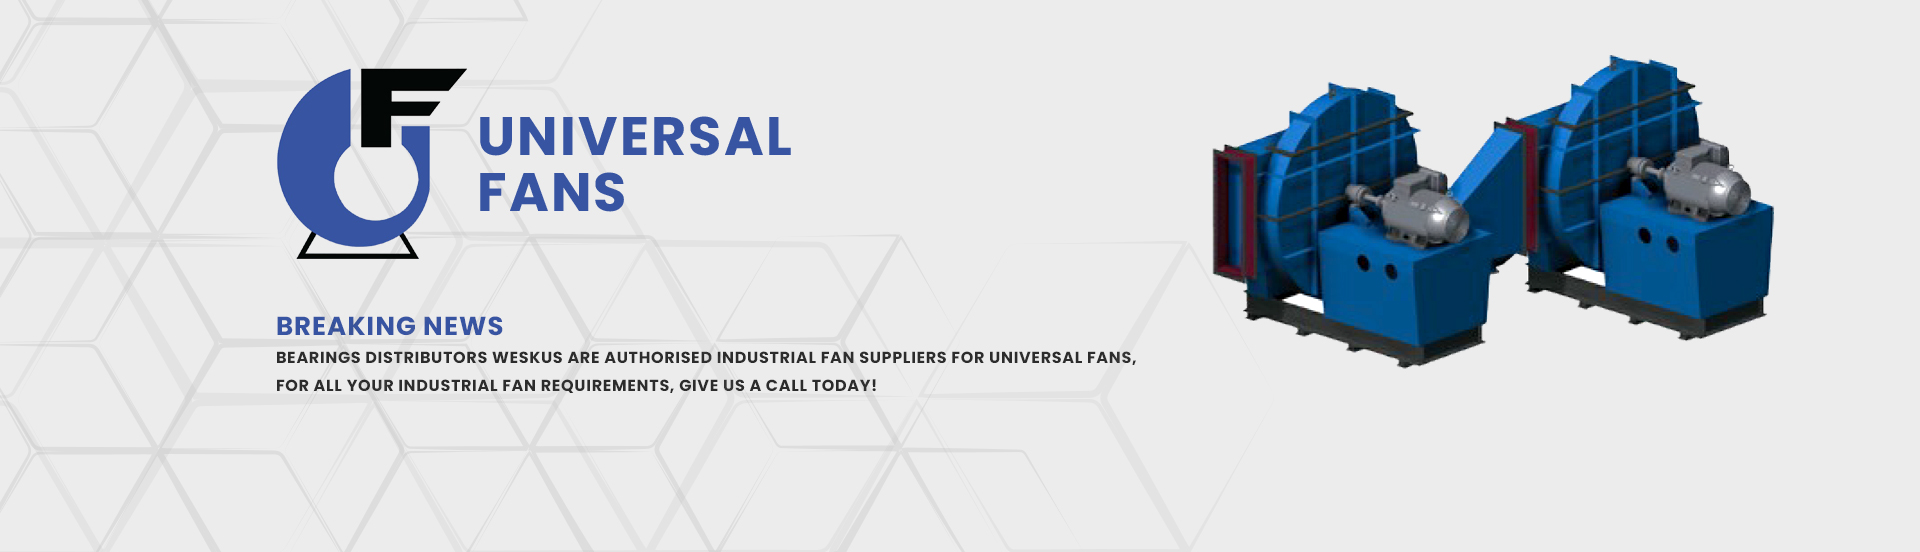 BD Weksus is a distributor of Universal Fans